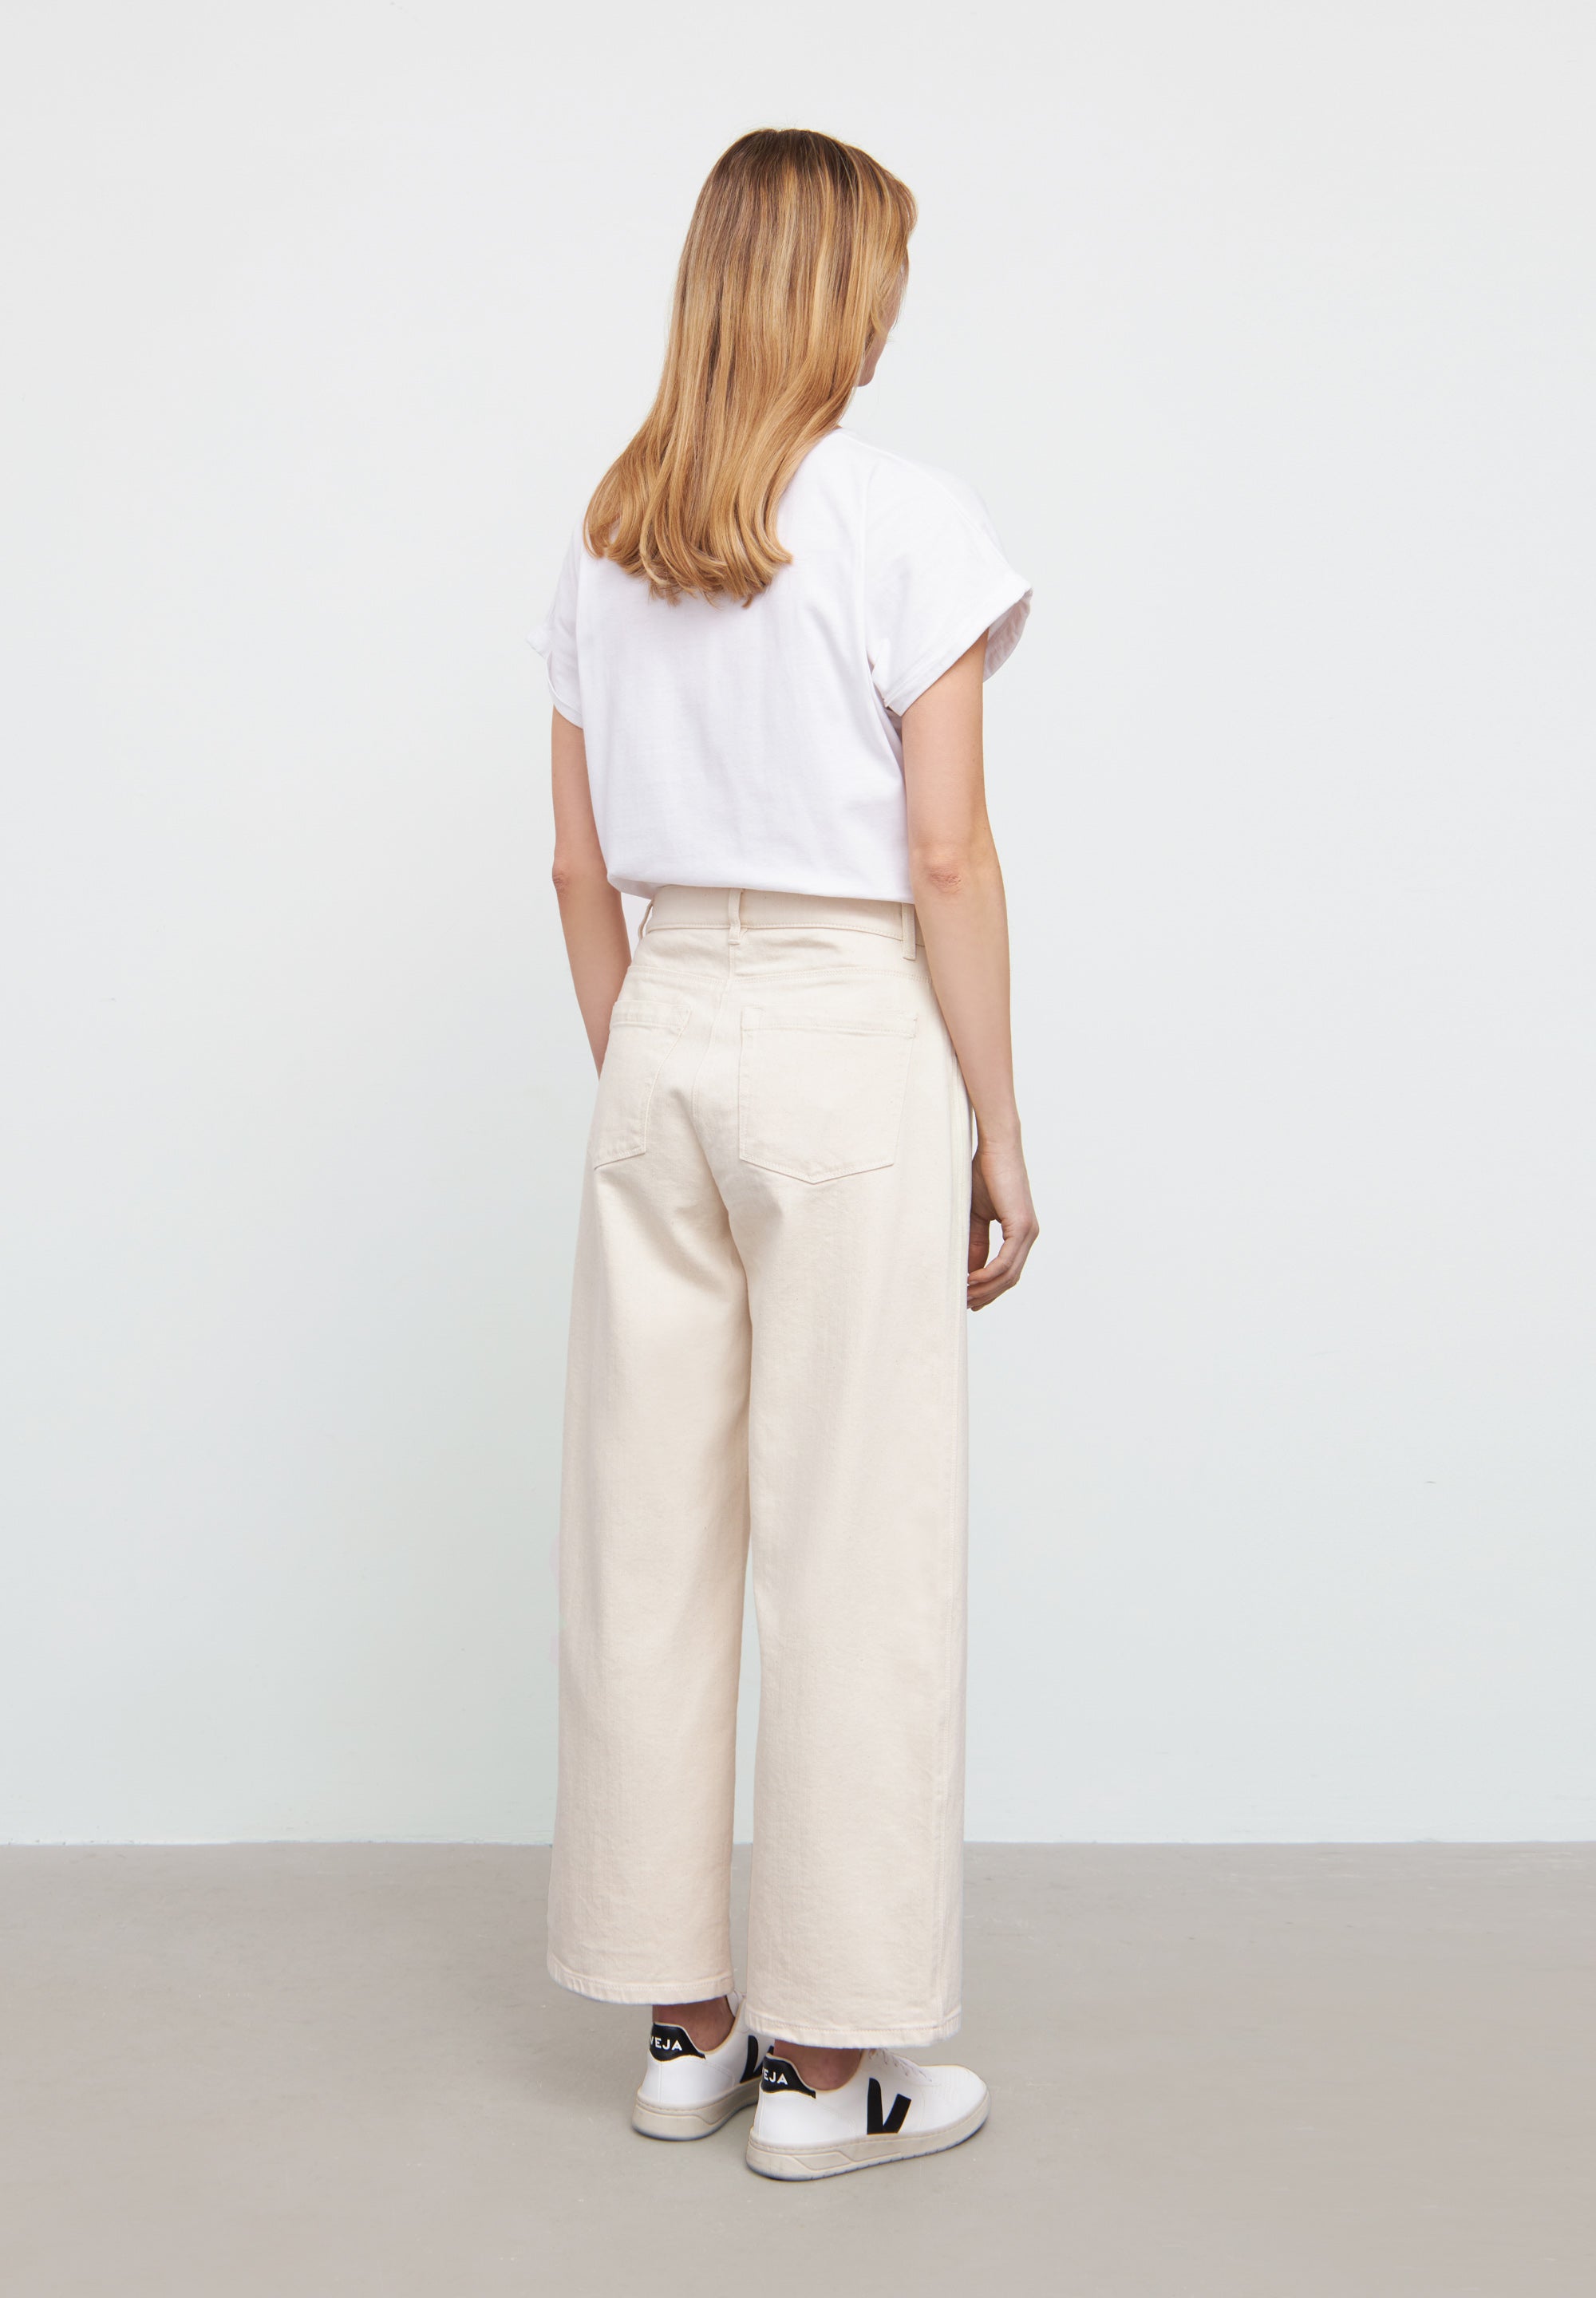 LAURIE  Fie Loose - Short Length Trousers LOOSE 13000 Birch